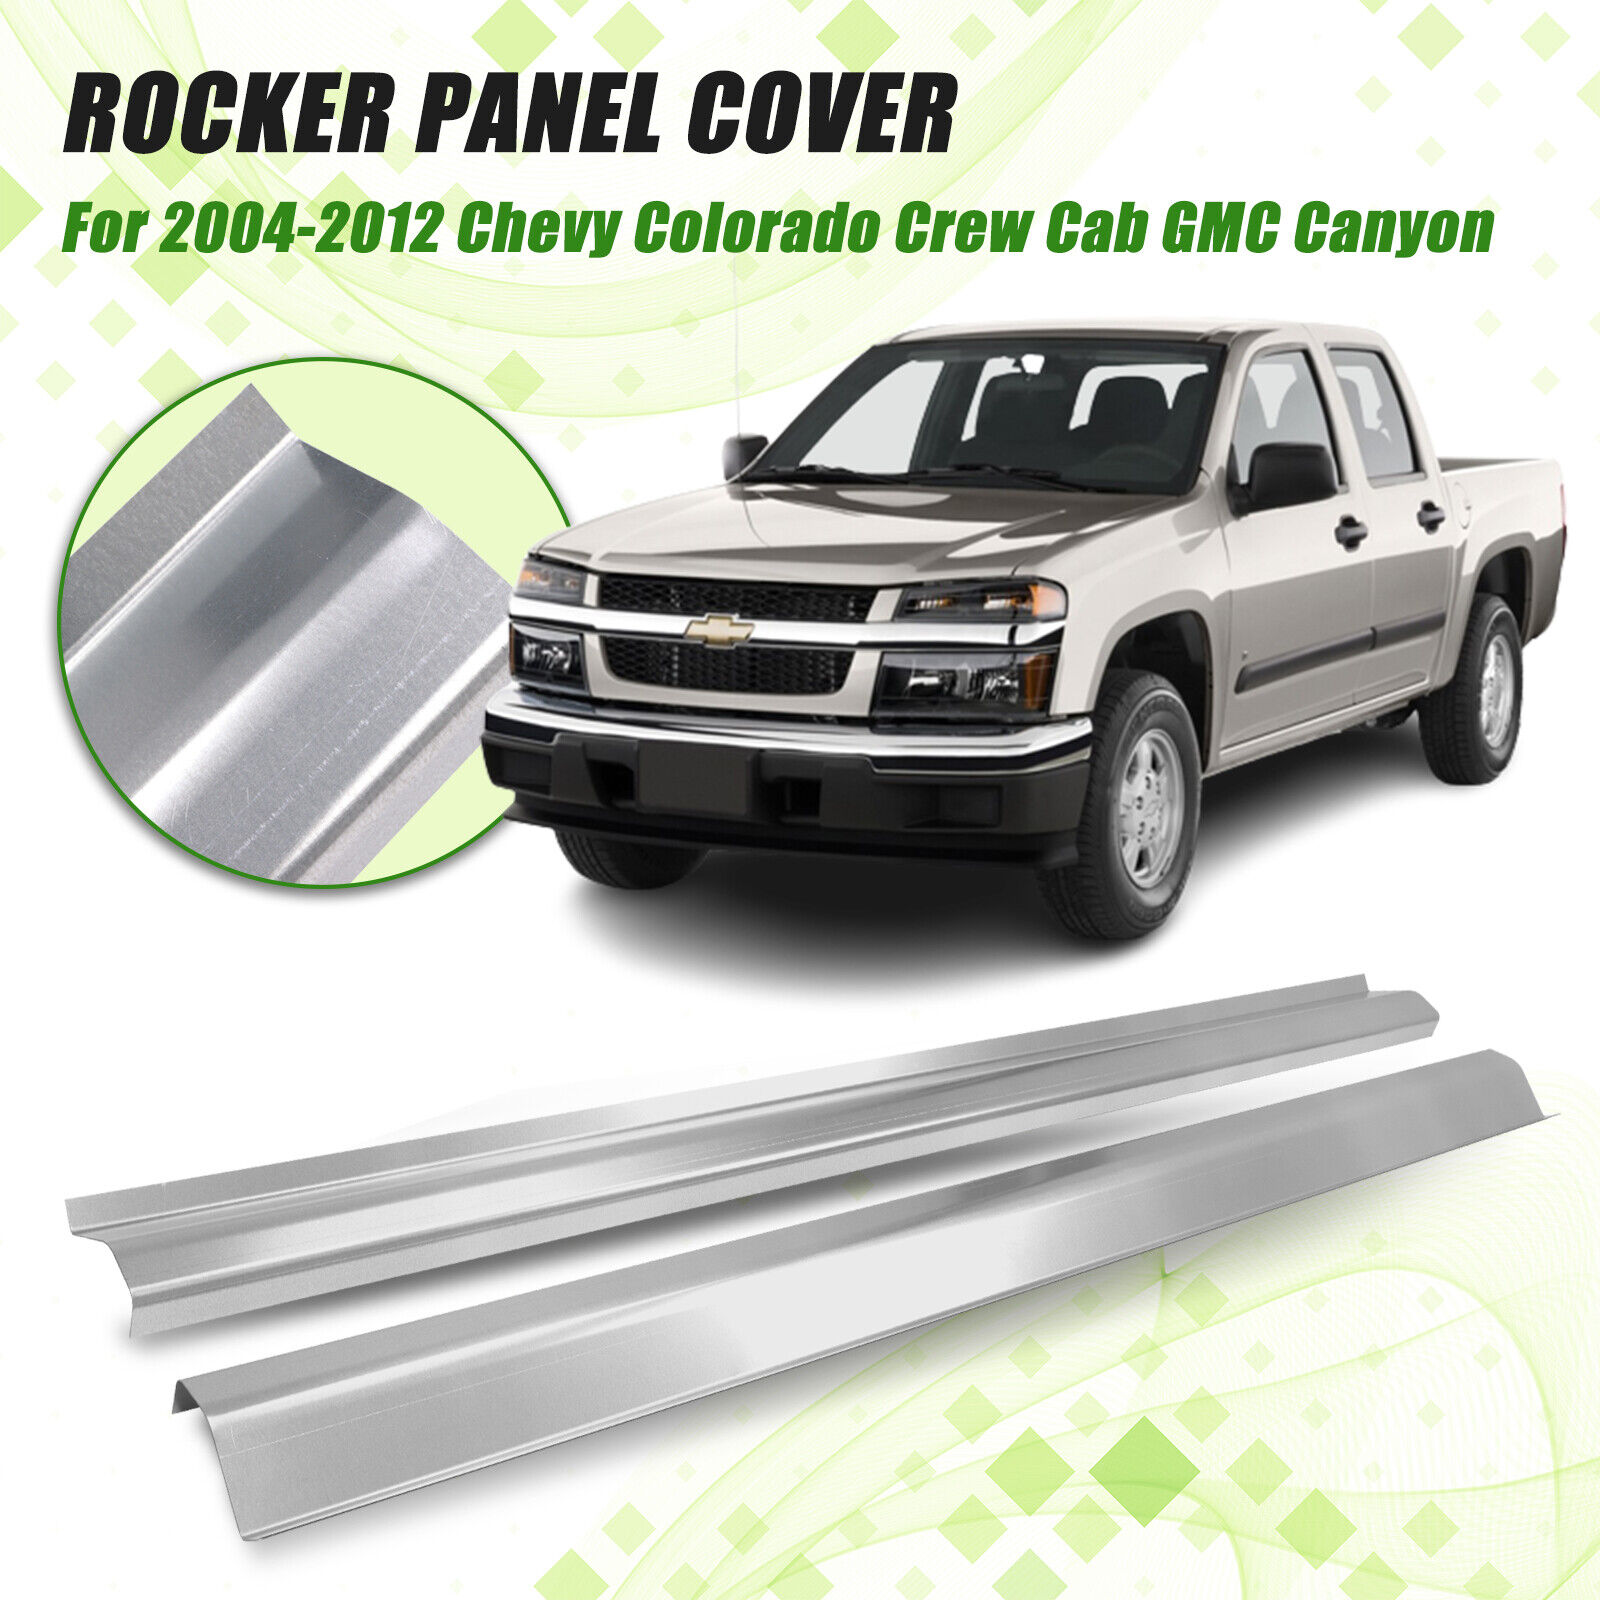 Pair of Rocker Panel Cover for 04-12 Chevy Colorado Crew Cab GMC Canyon Steel